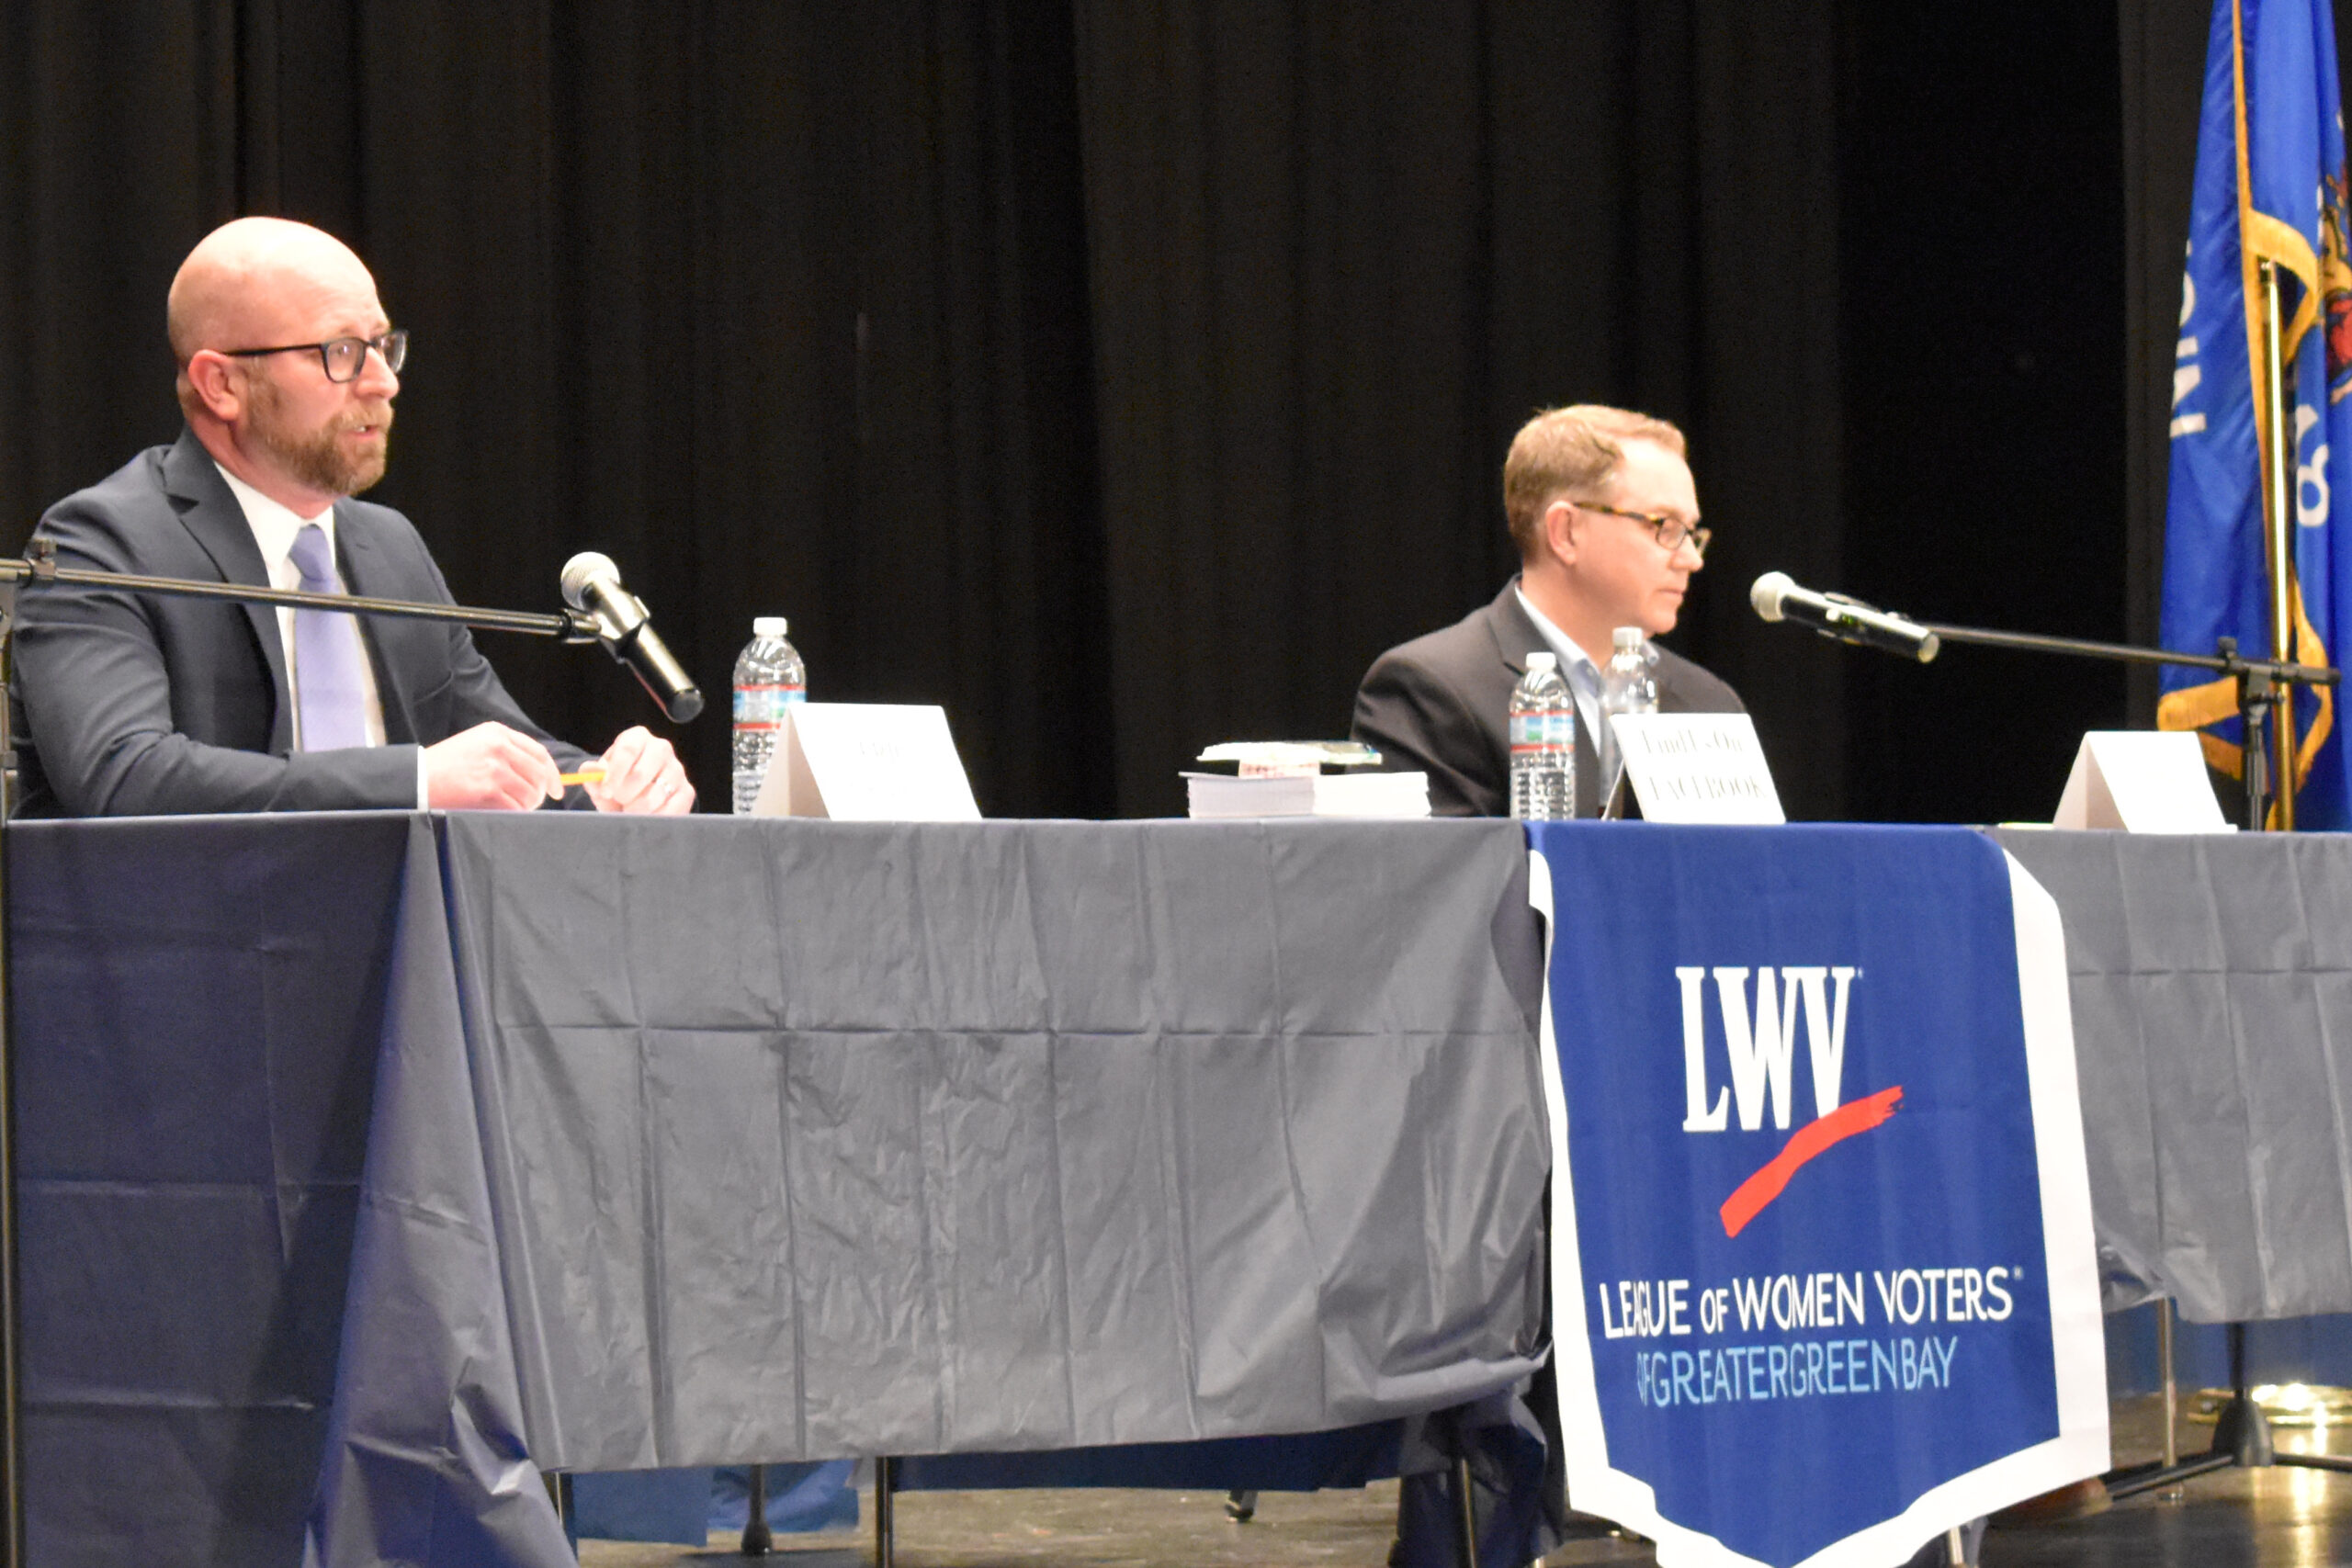 Incumbent Green Bay Mayor Eric Genrich and Brown County Administration Director Chad Weininger square off in a League of Women Voters candidate forum.